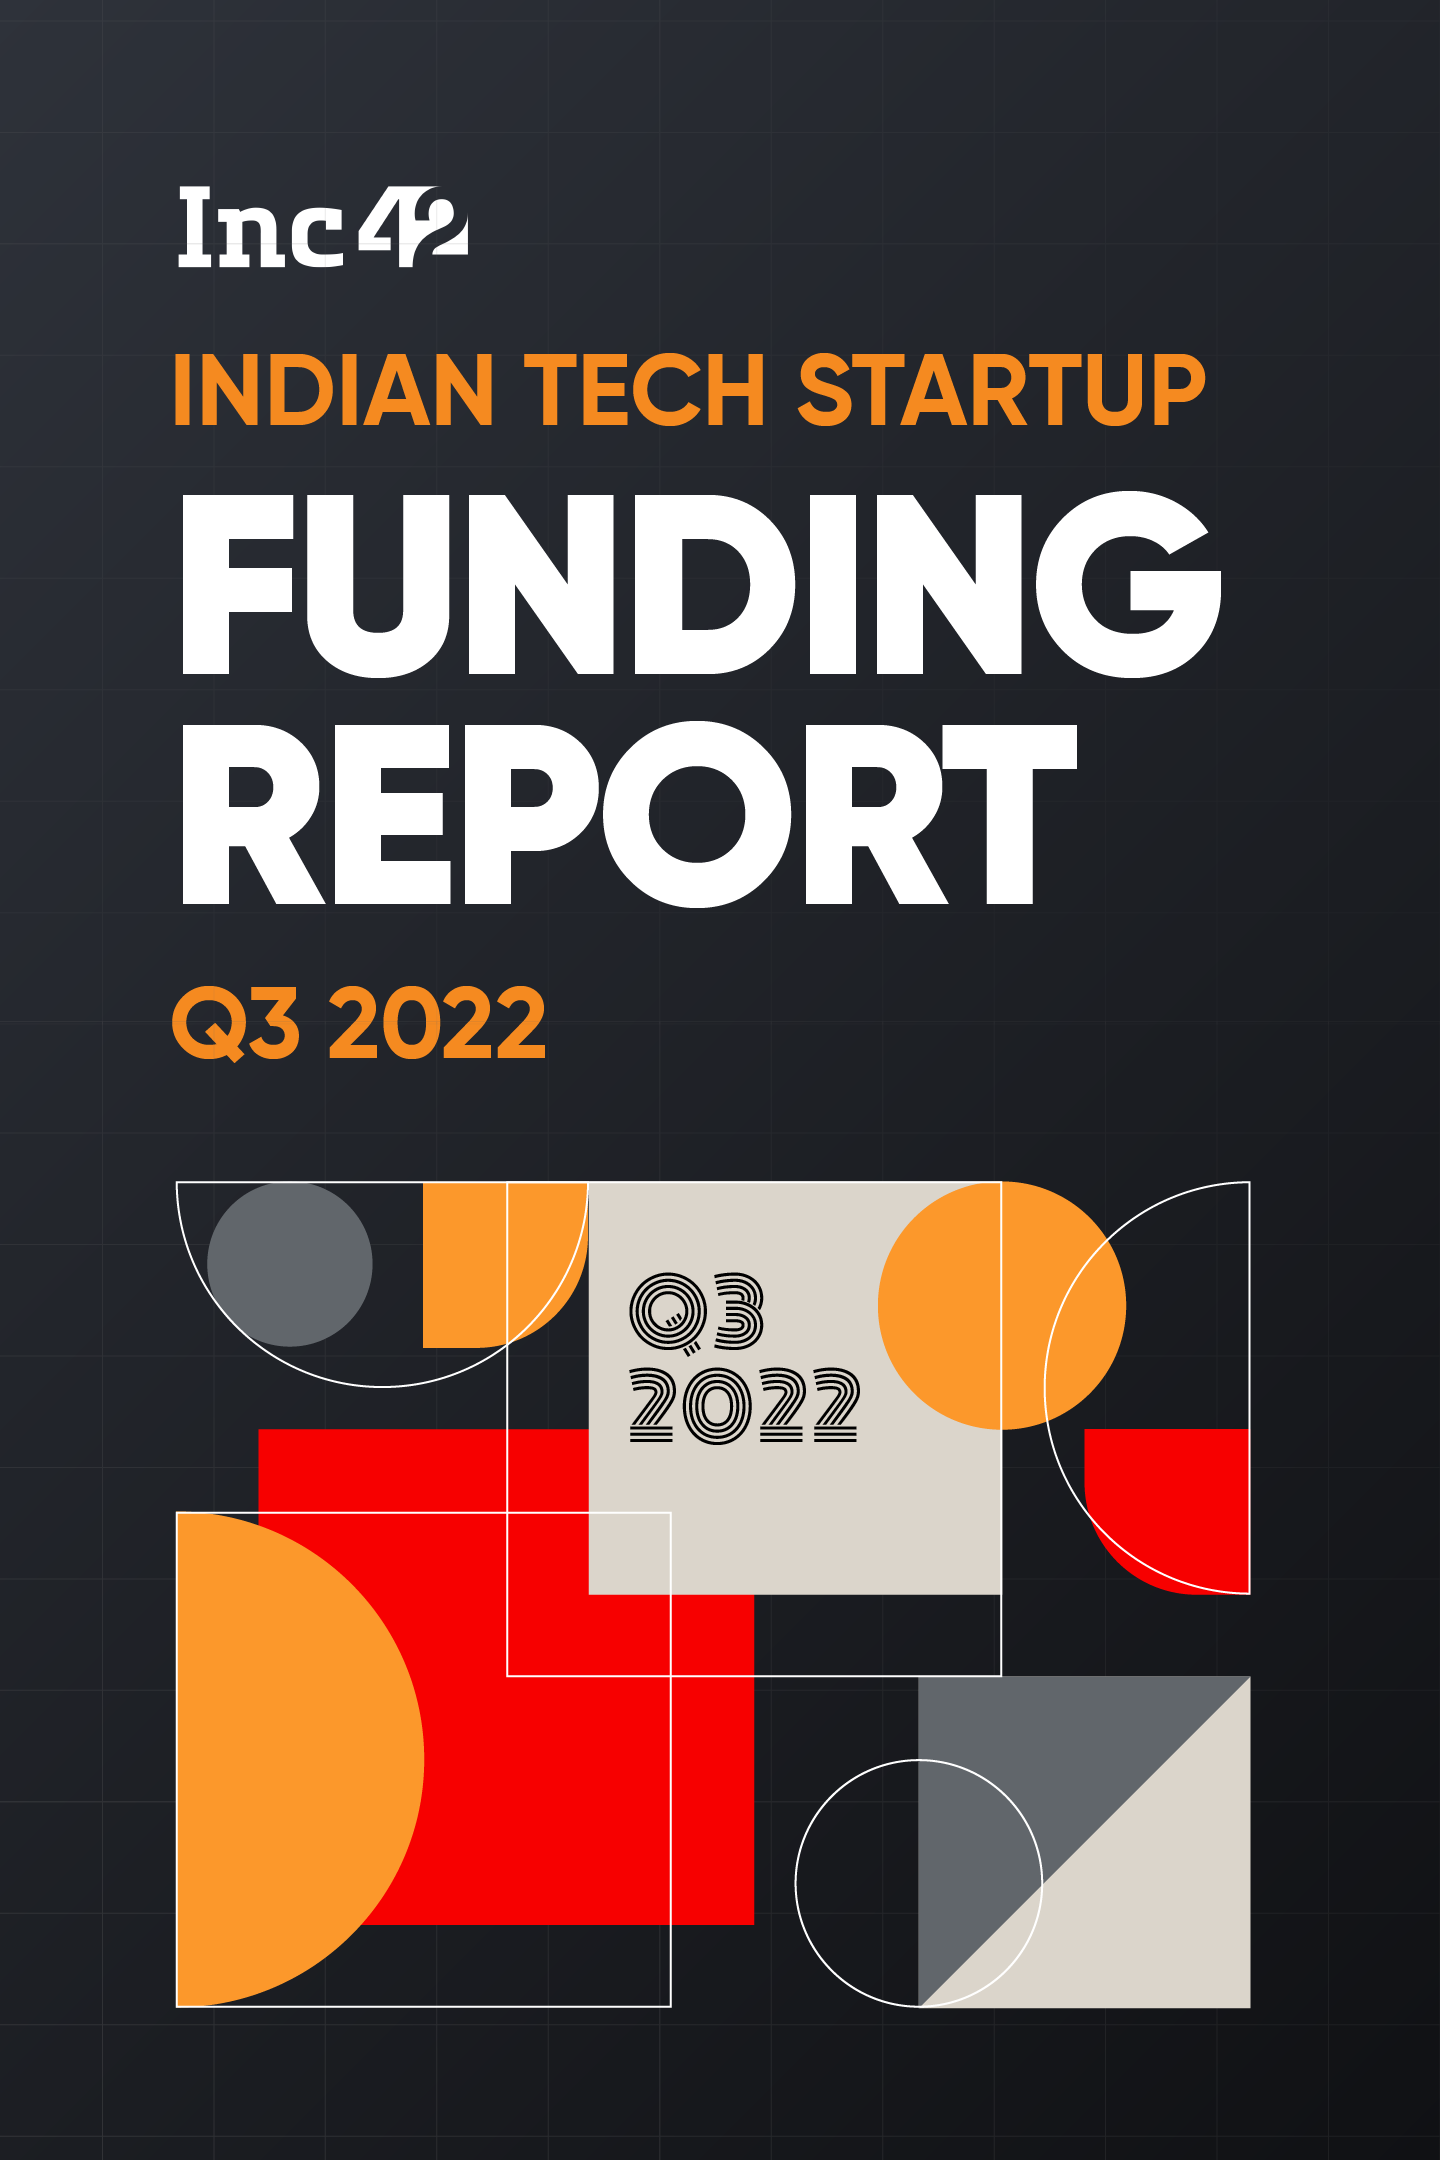 Indian Tech Startup Funding Report Q3 2022